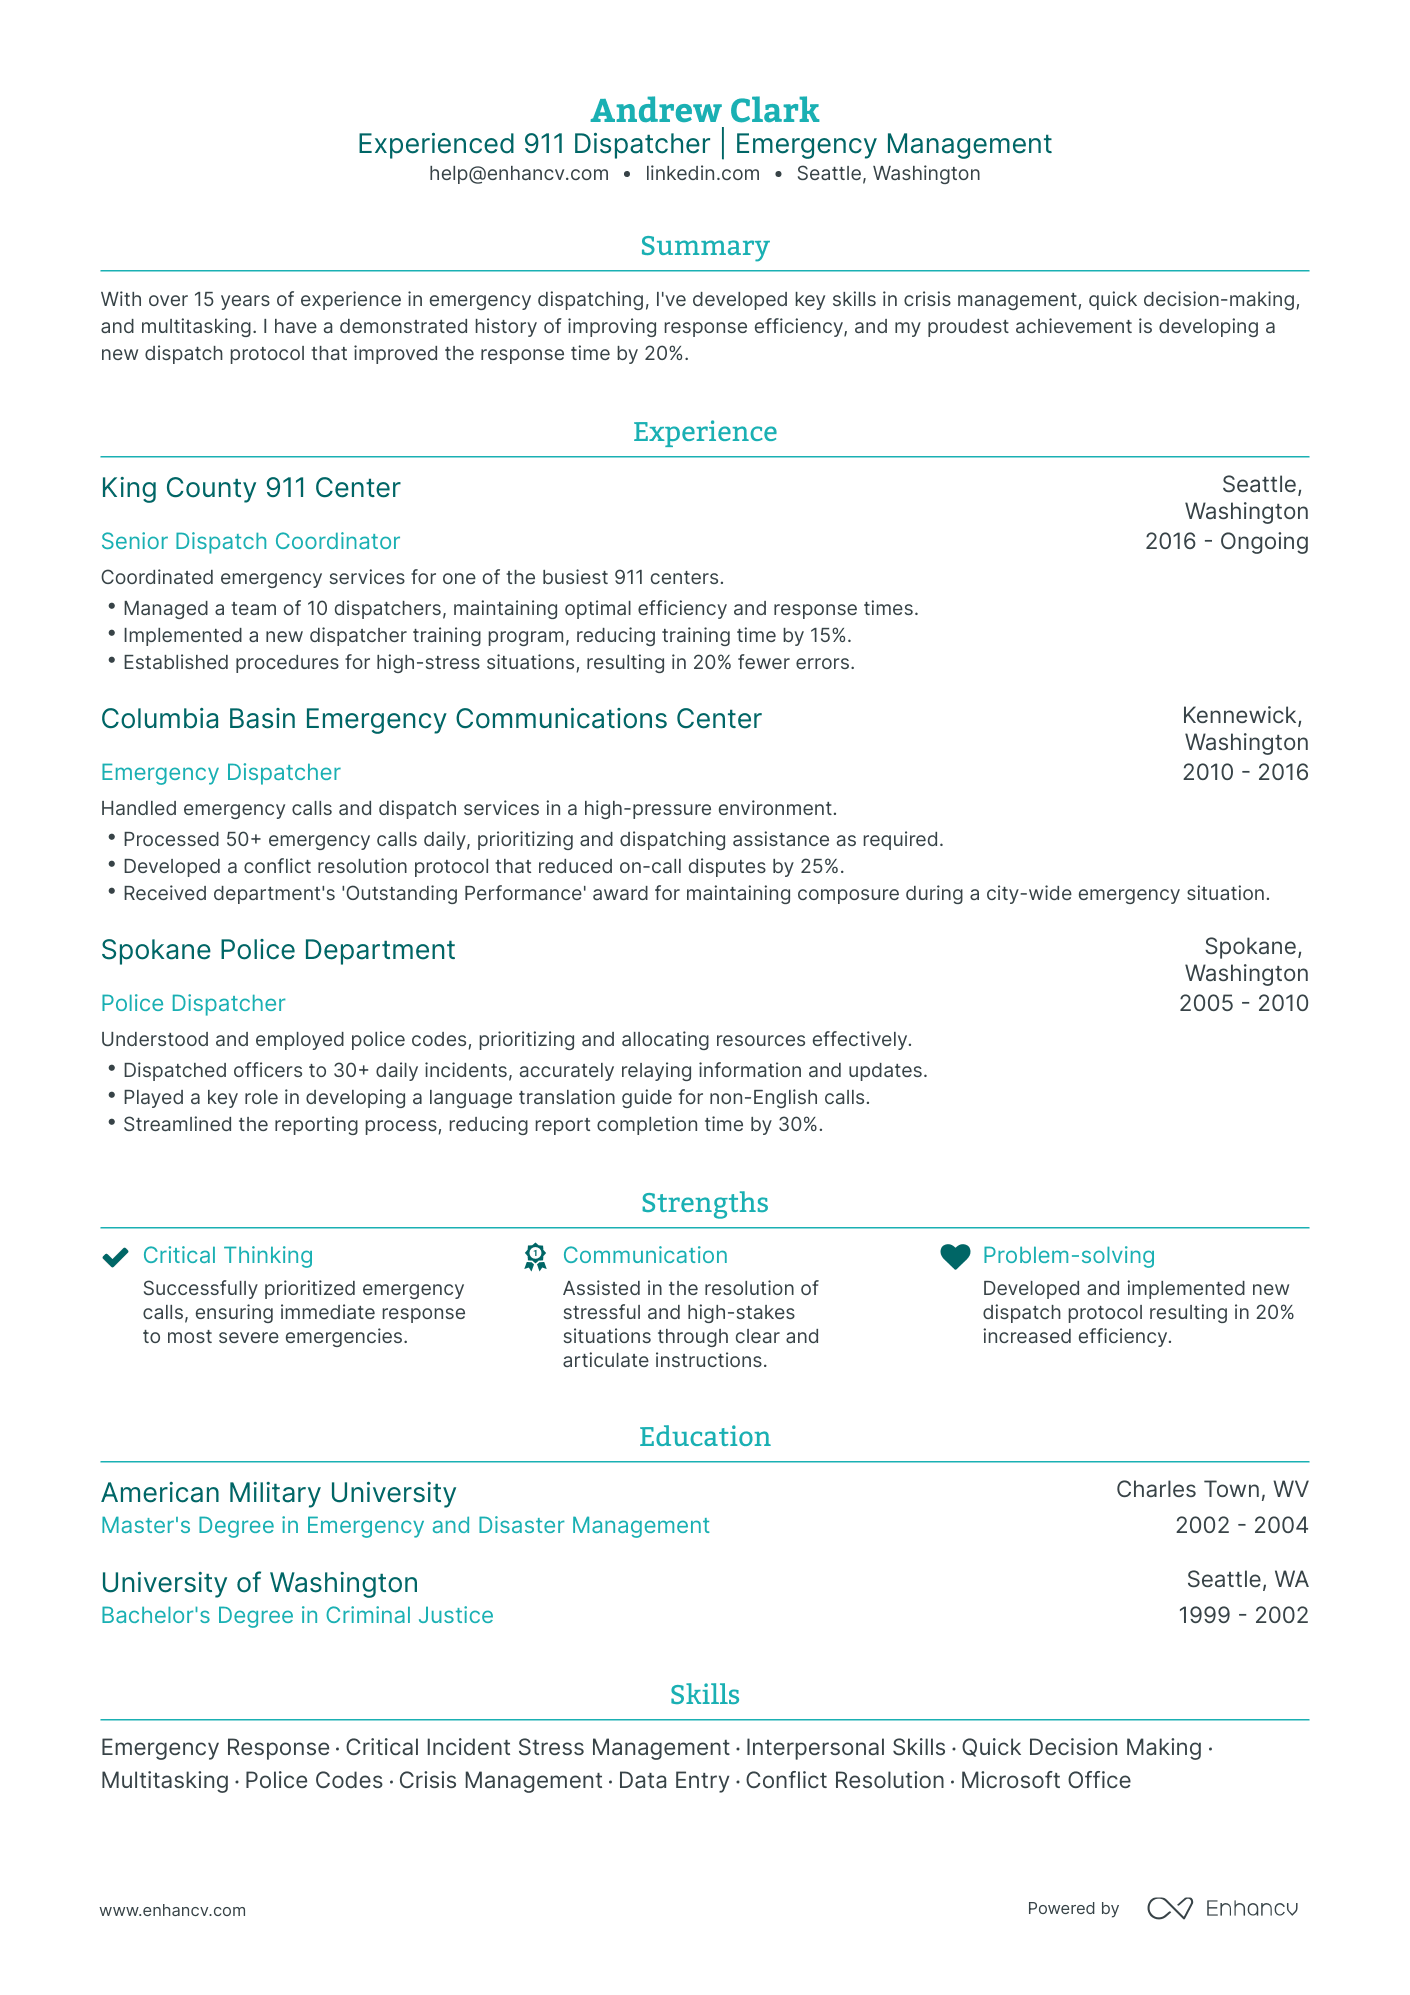 resume summary examples for dispatcher